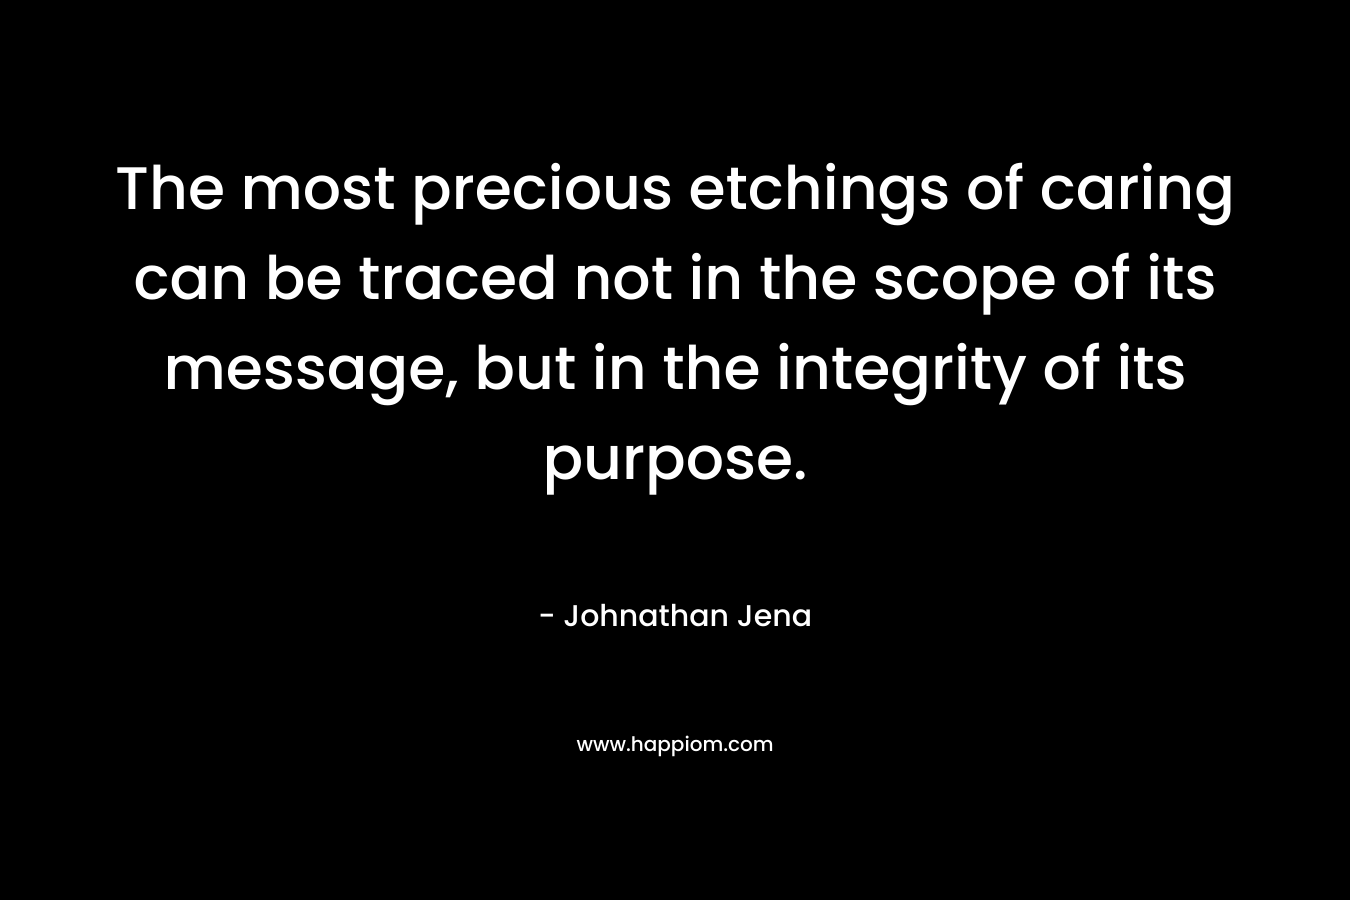 The most precious etchings of caring can be traced not in the scope of its message, but in the integrity of its purpose. – Johnathan Jena